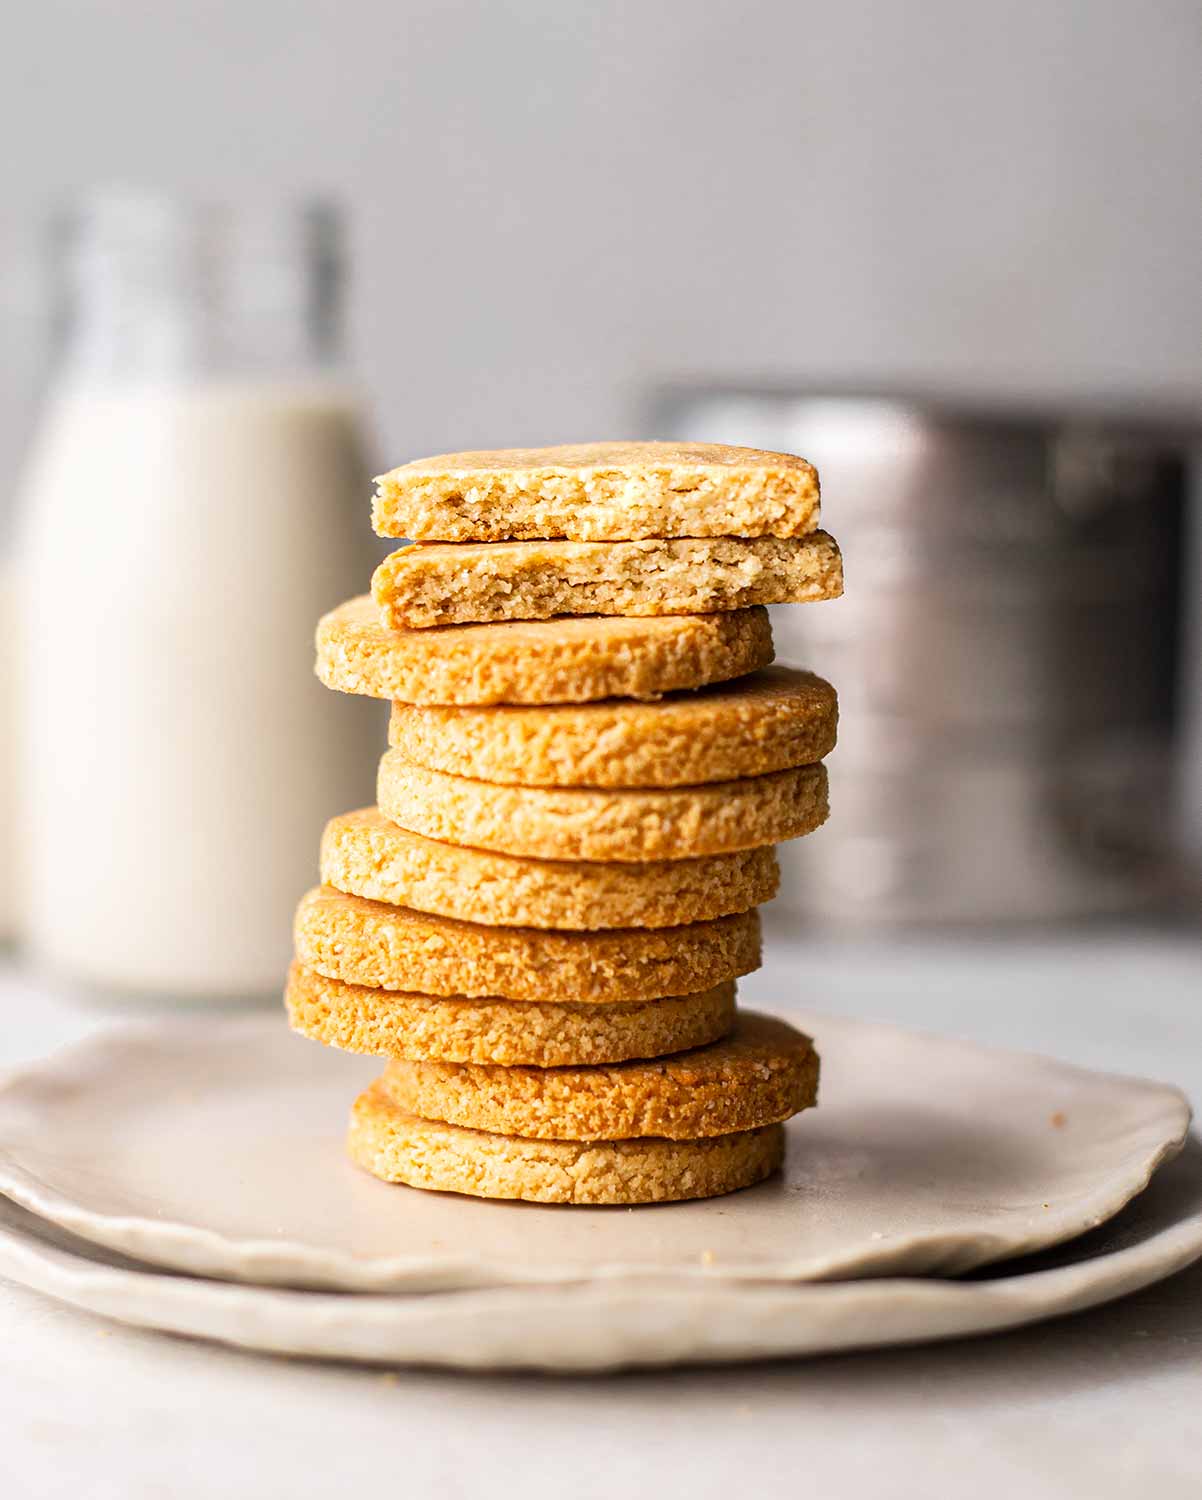 Close up of stack of cookies. Two cookies on top are in half revealing crumbly and golden texture.